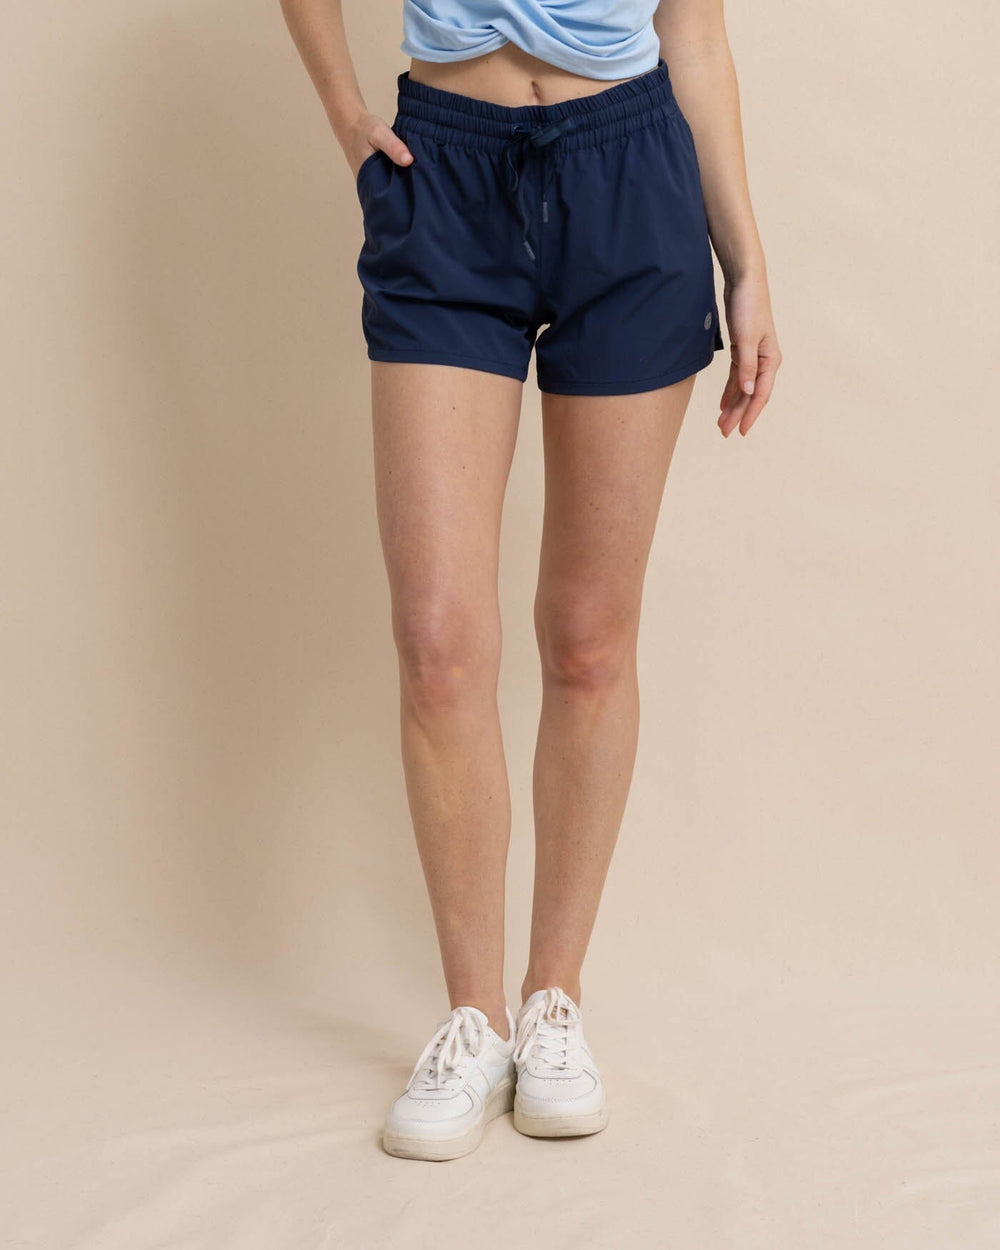 The front view of the Southern Tide Sammie Intercoastal Performance Short by Southern Tide - Dress Blue